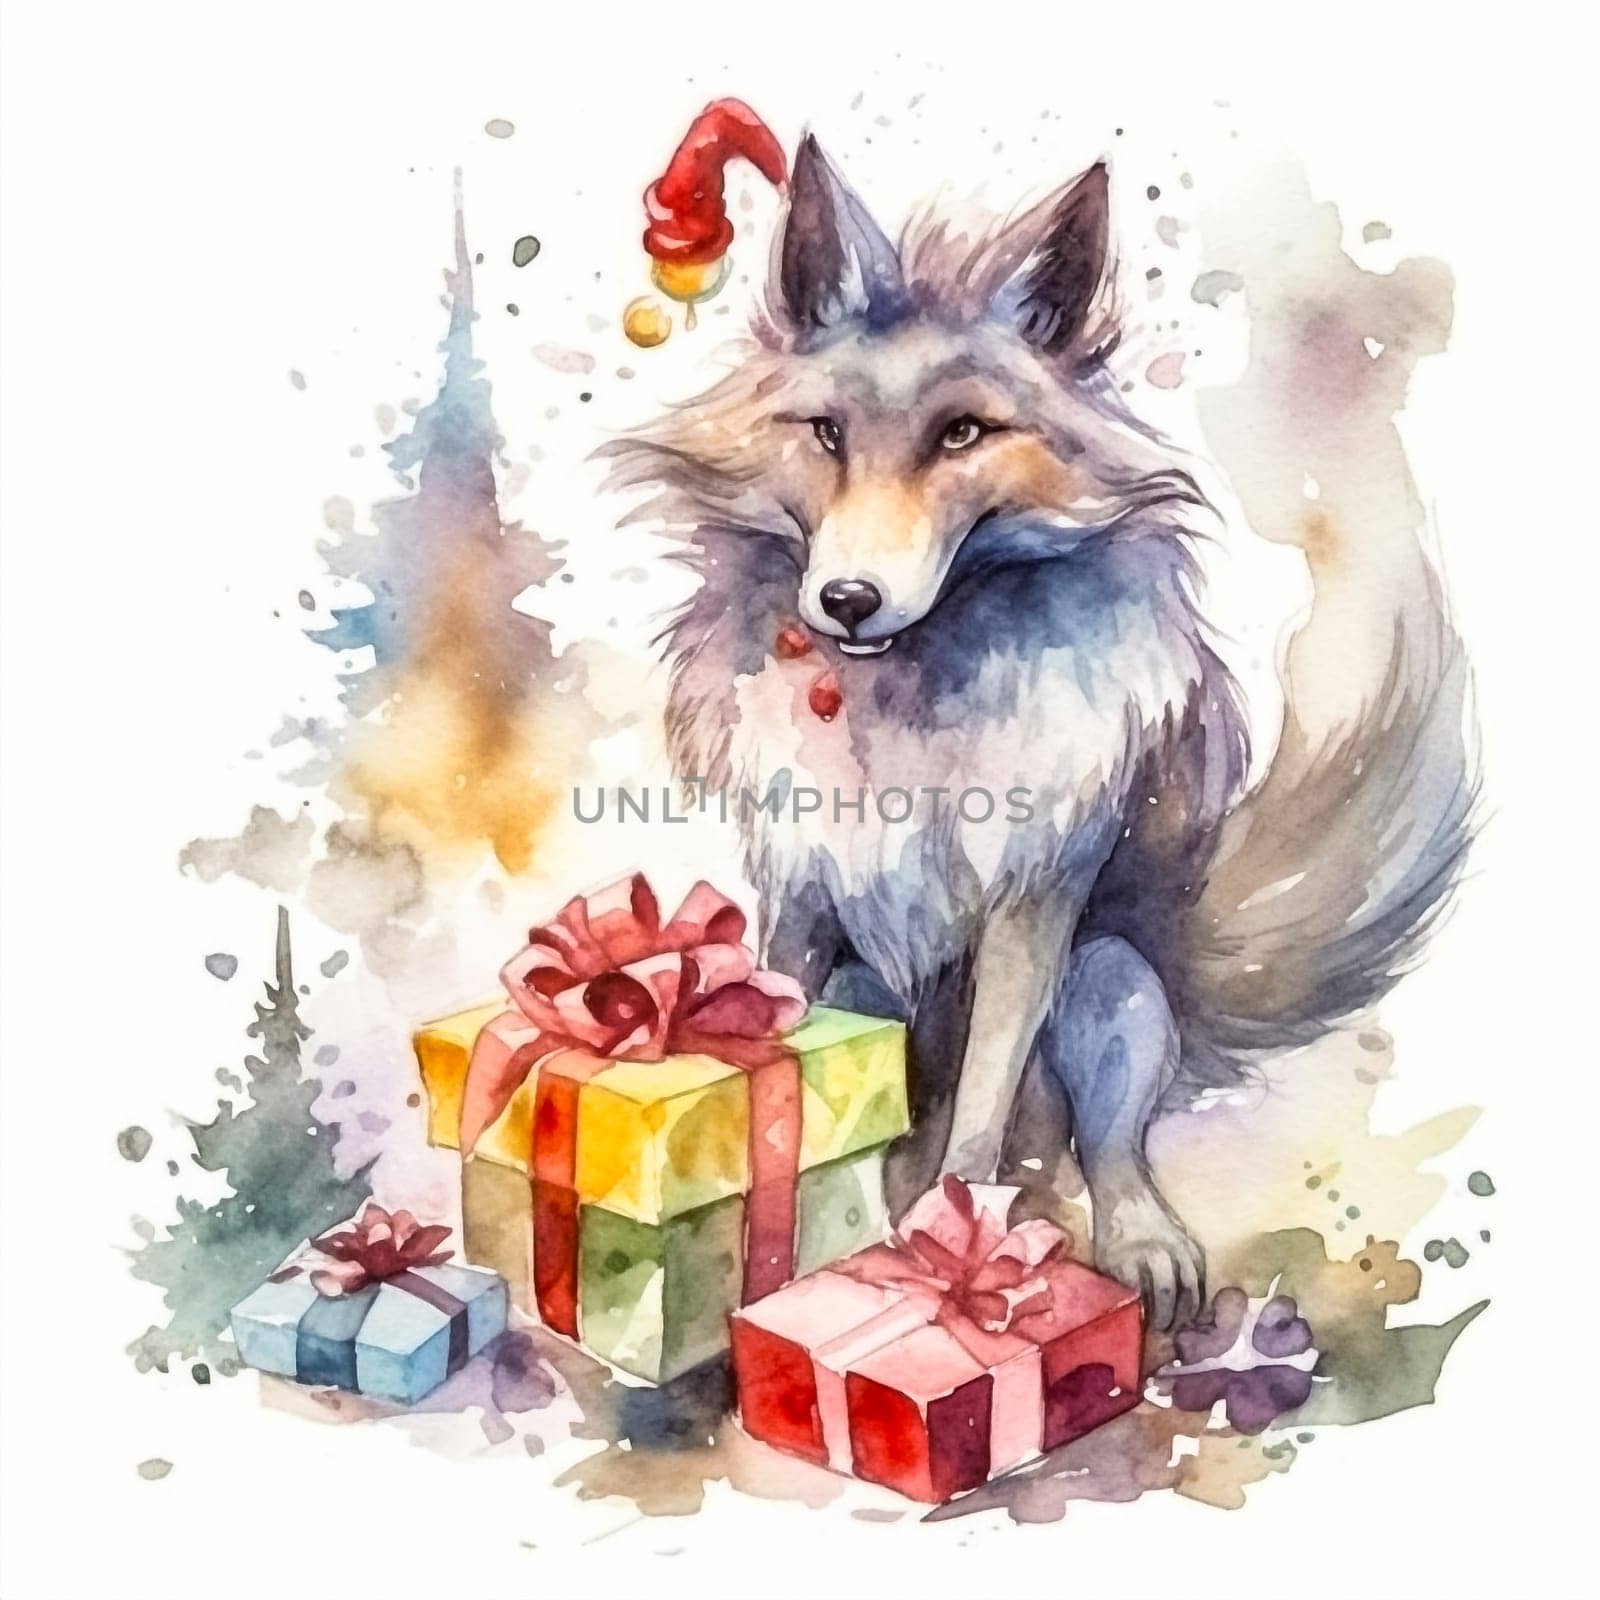 A charming watercolor depiction of a wolf seated beside a stack of festive Christmas presents, evoking a cozy and heartwarming holiday atmosphere.